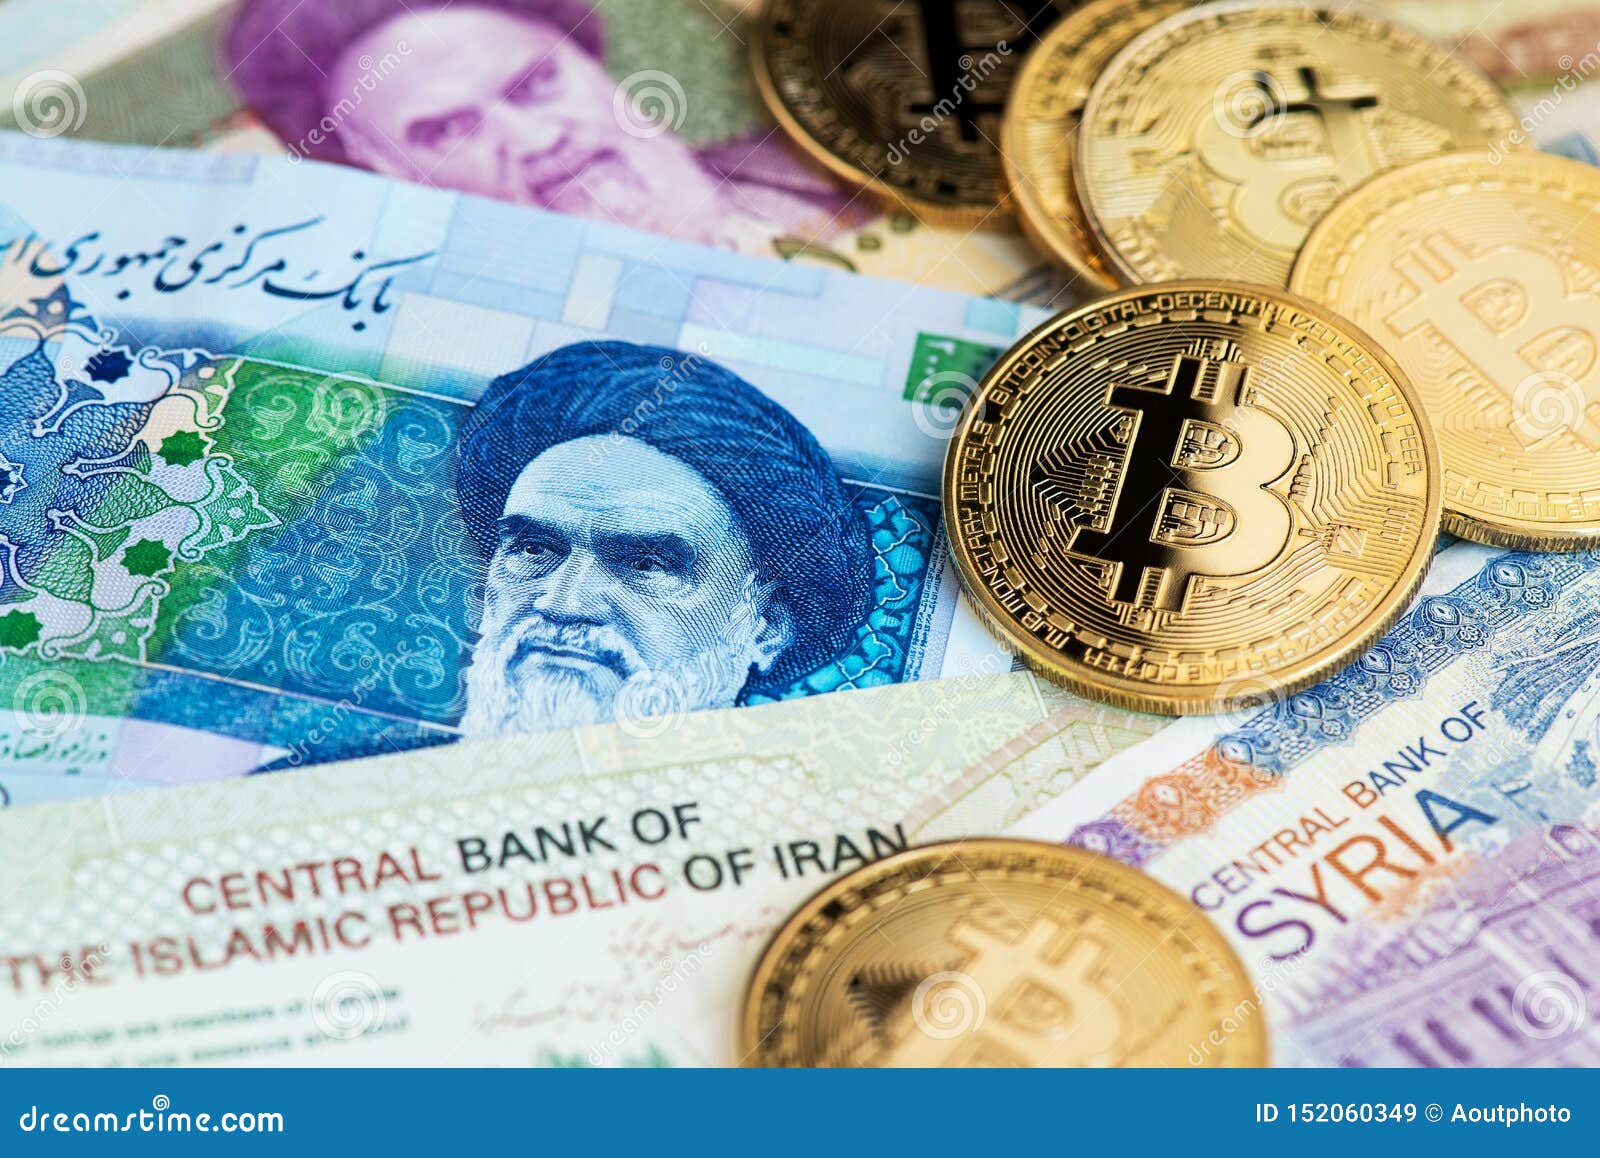 buy bitcoin with iranian rial